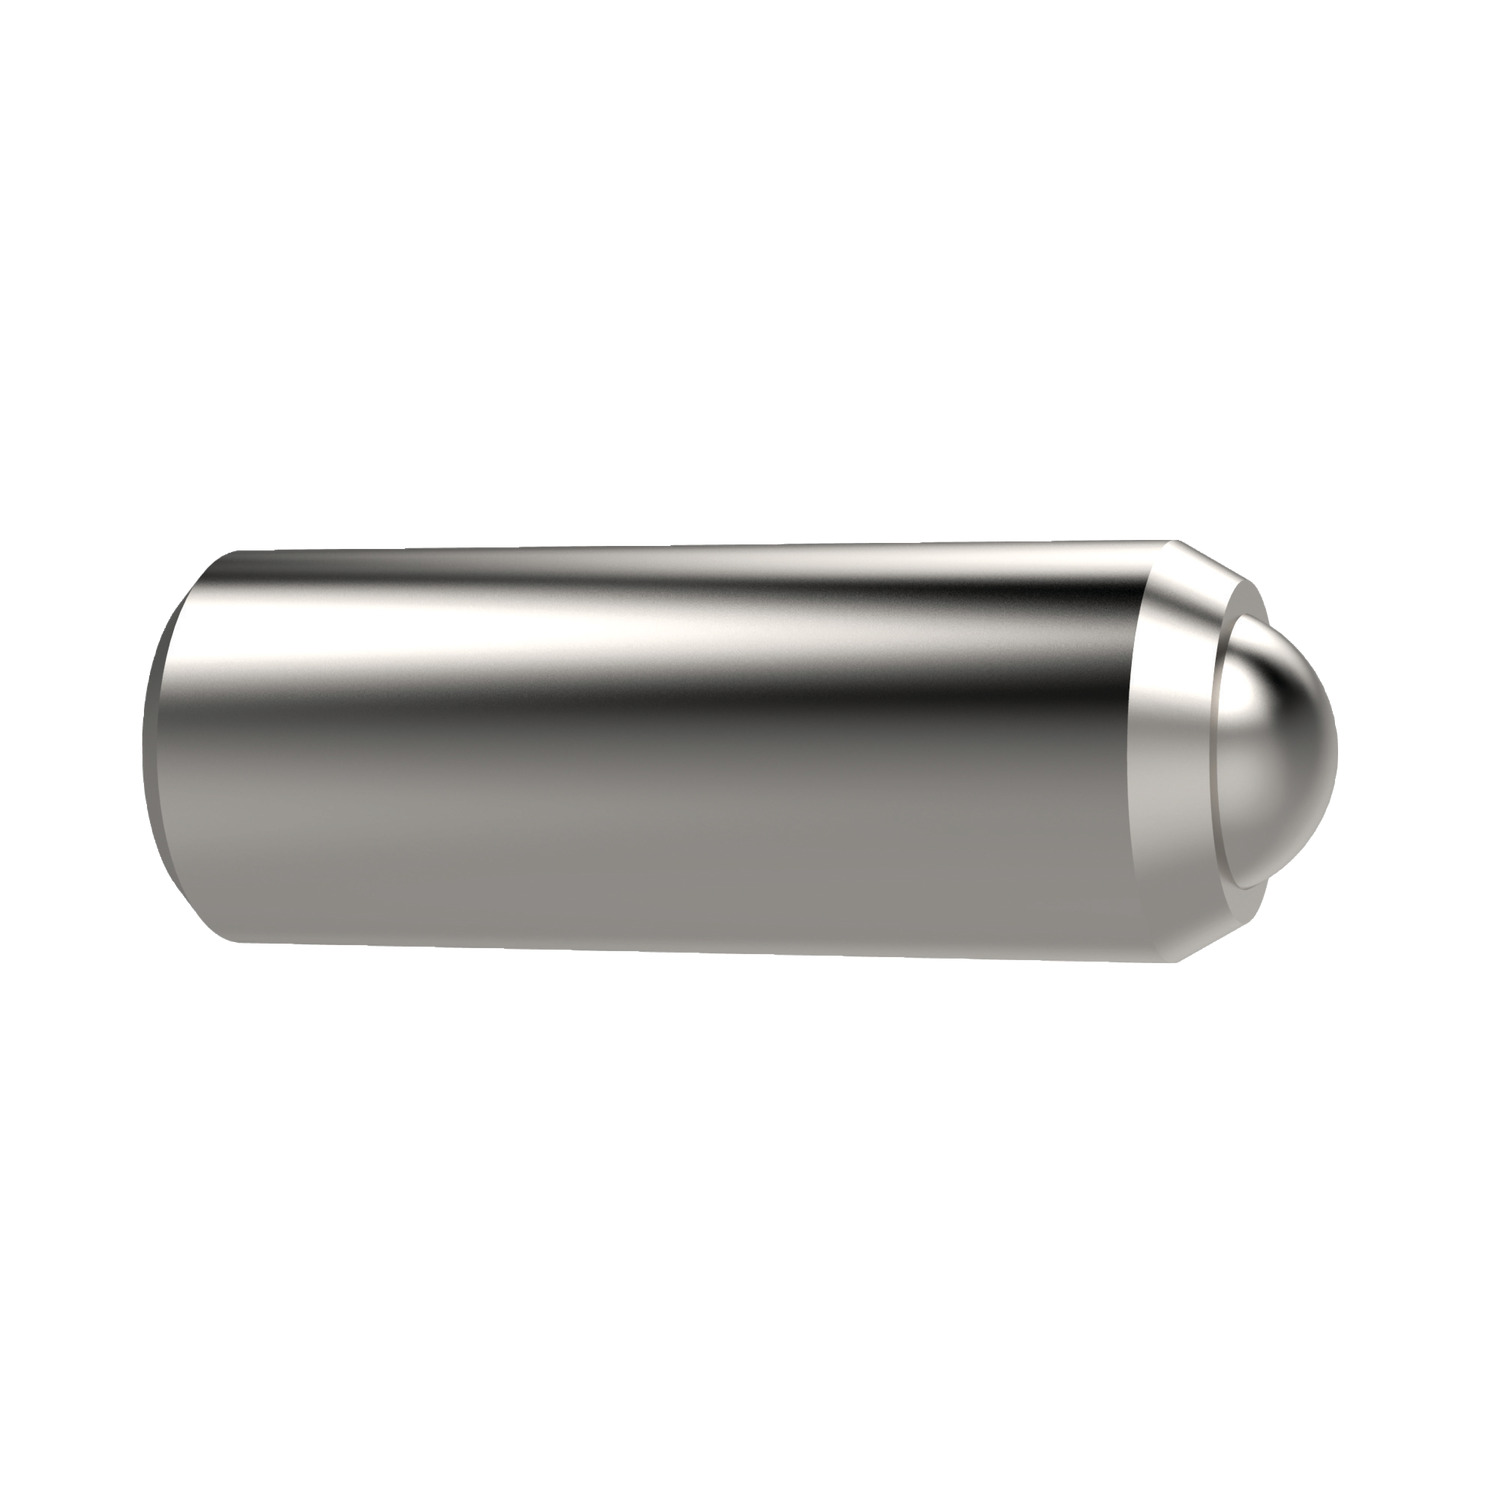 32280.W0377 Spring Plunger - Ball - Smooth Model All Stainless - 8,0 - 6,0 - 18,0 EC:20253127 WG:05063052078811